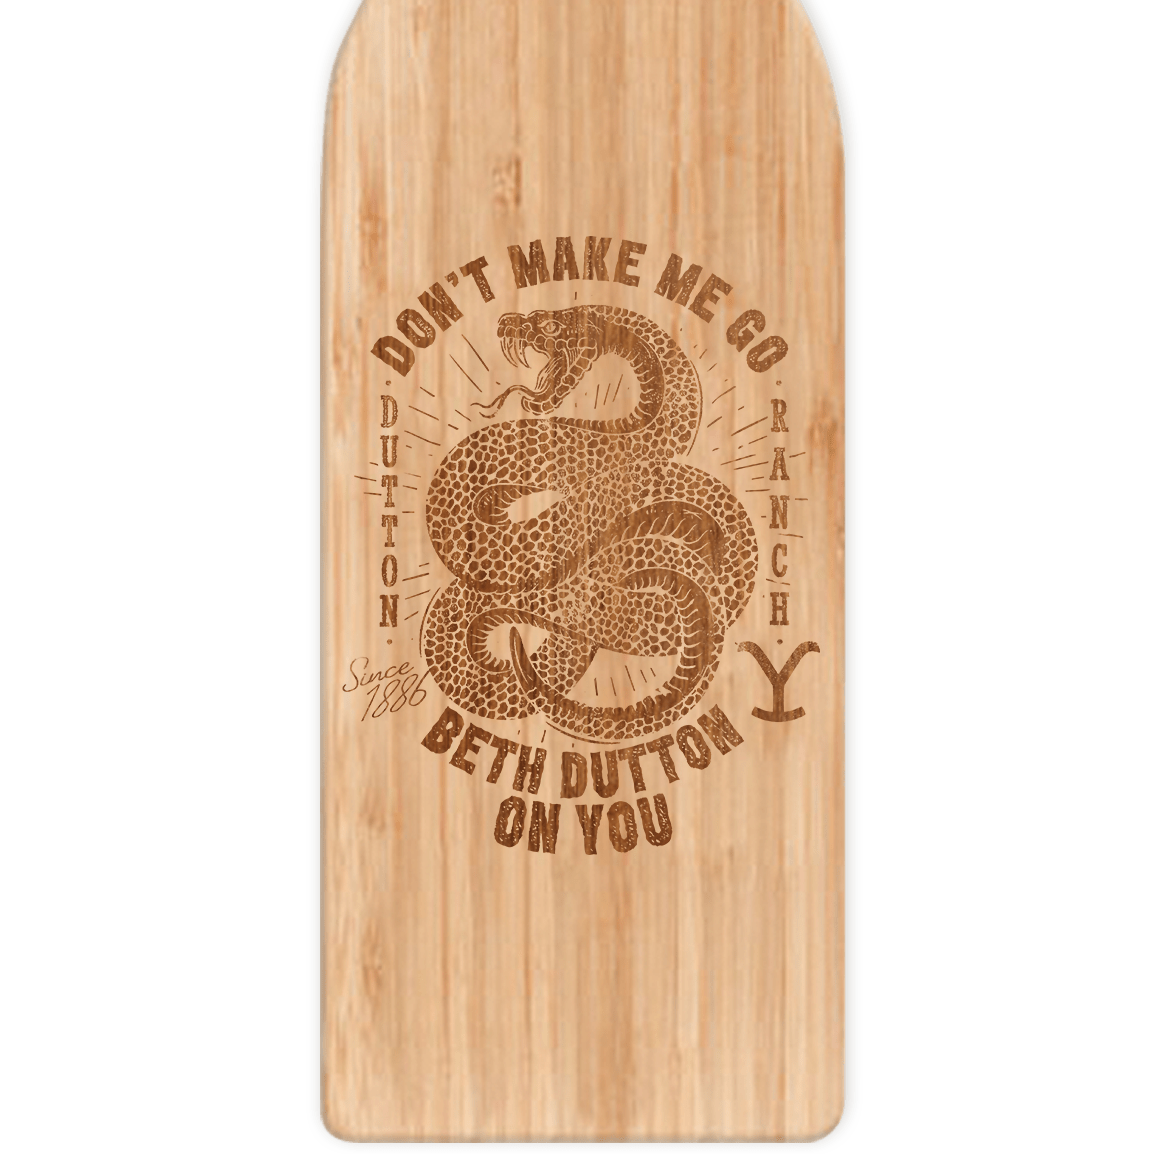 Yellowstone Snake Beth Dutton On You Wine Bottle Cutting Board - Paramount Shop